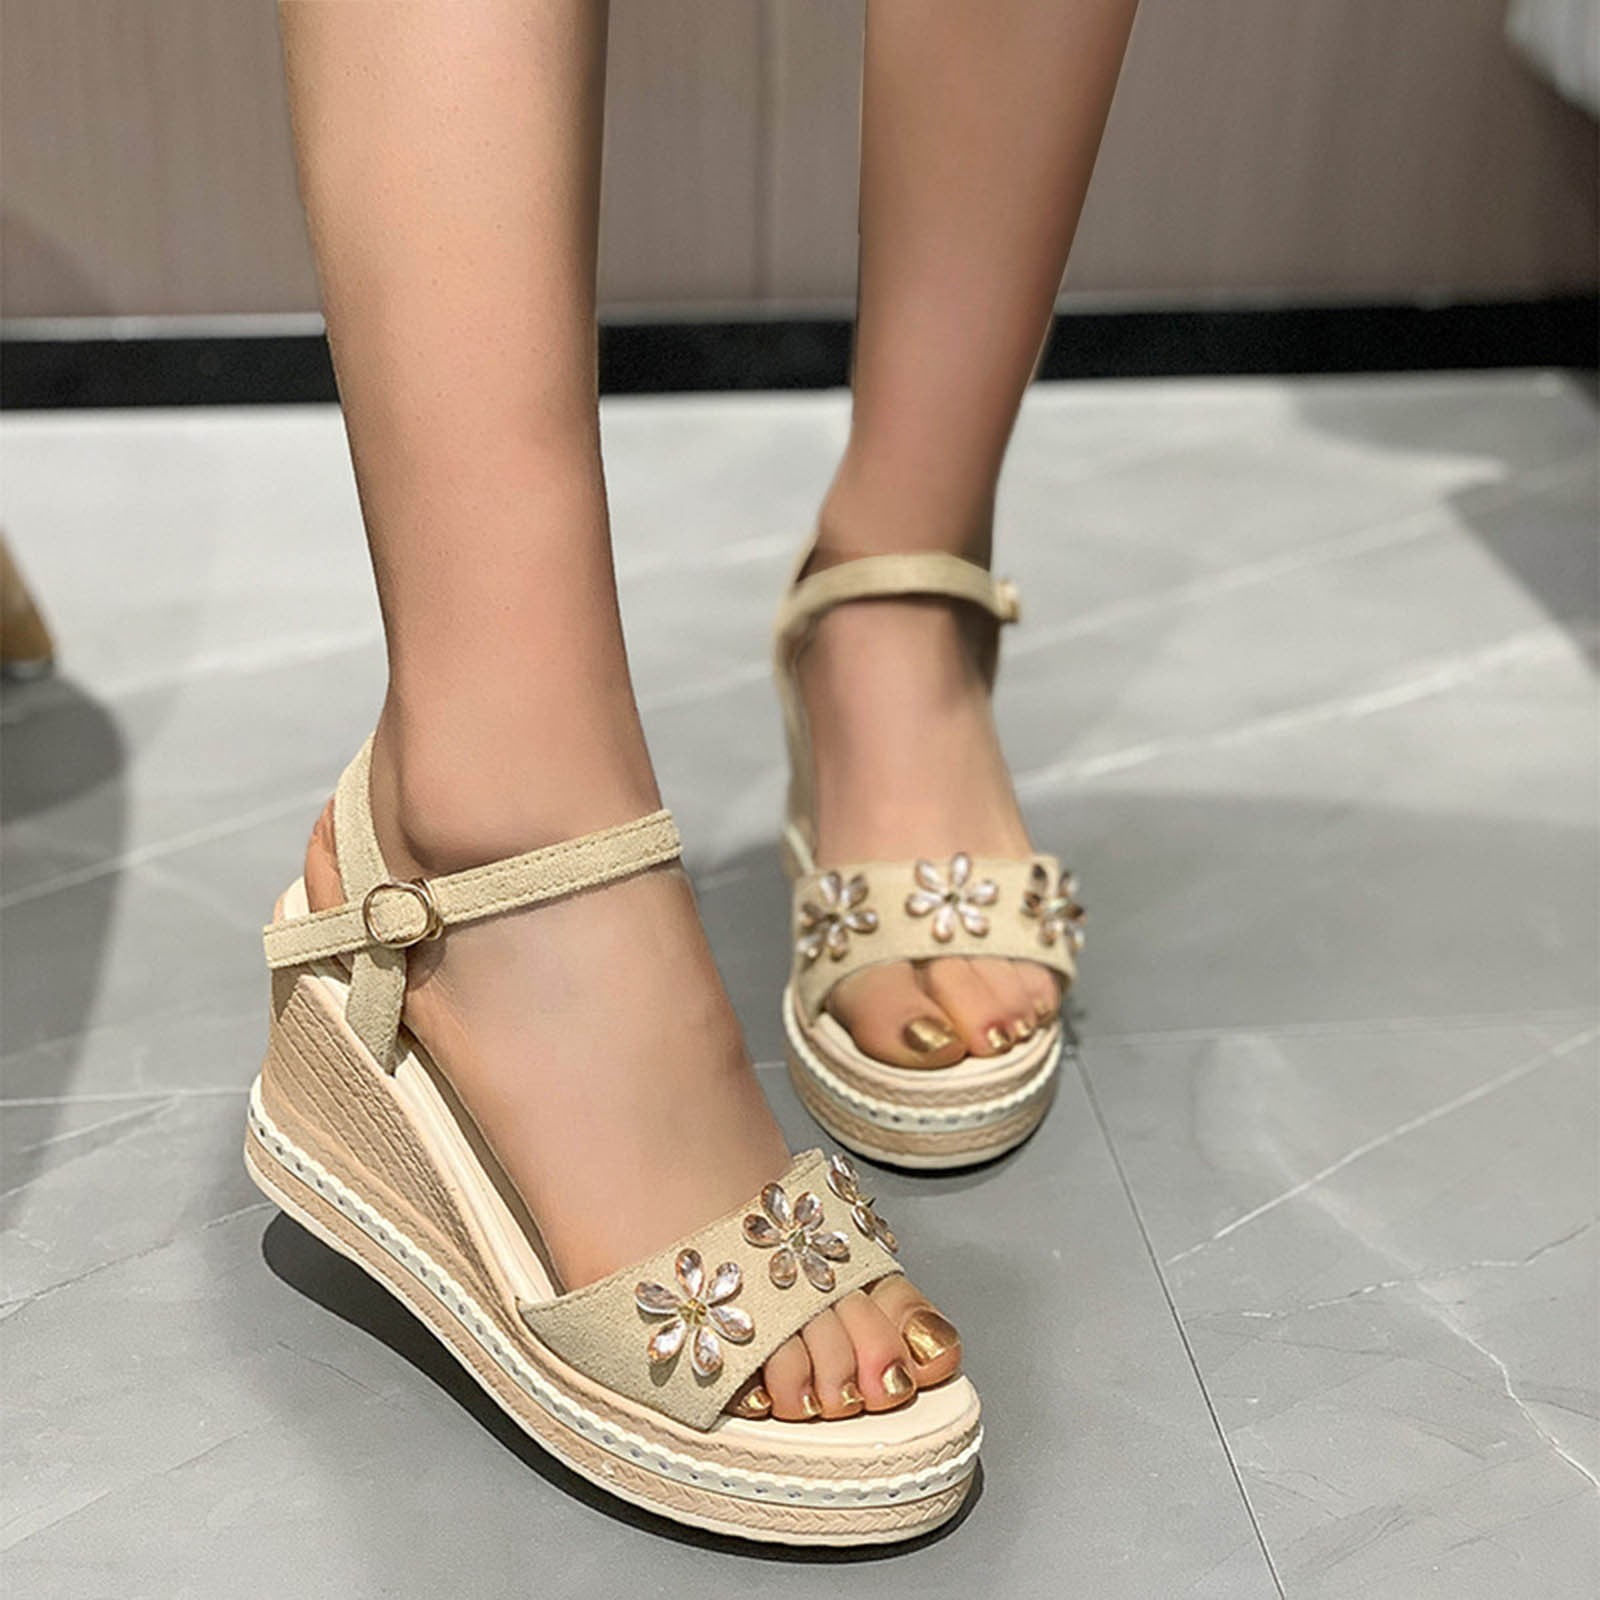  Braided Sandals for Women Elaborate Wedges Floral Fashion  Crystal High Sandals Platforms Shoes Women Heels Ladies Women's Sandals  (Silver, 8.5) : Sports & Outdoors